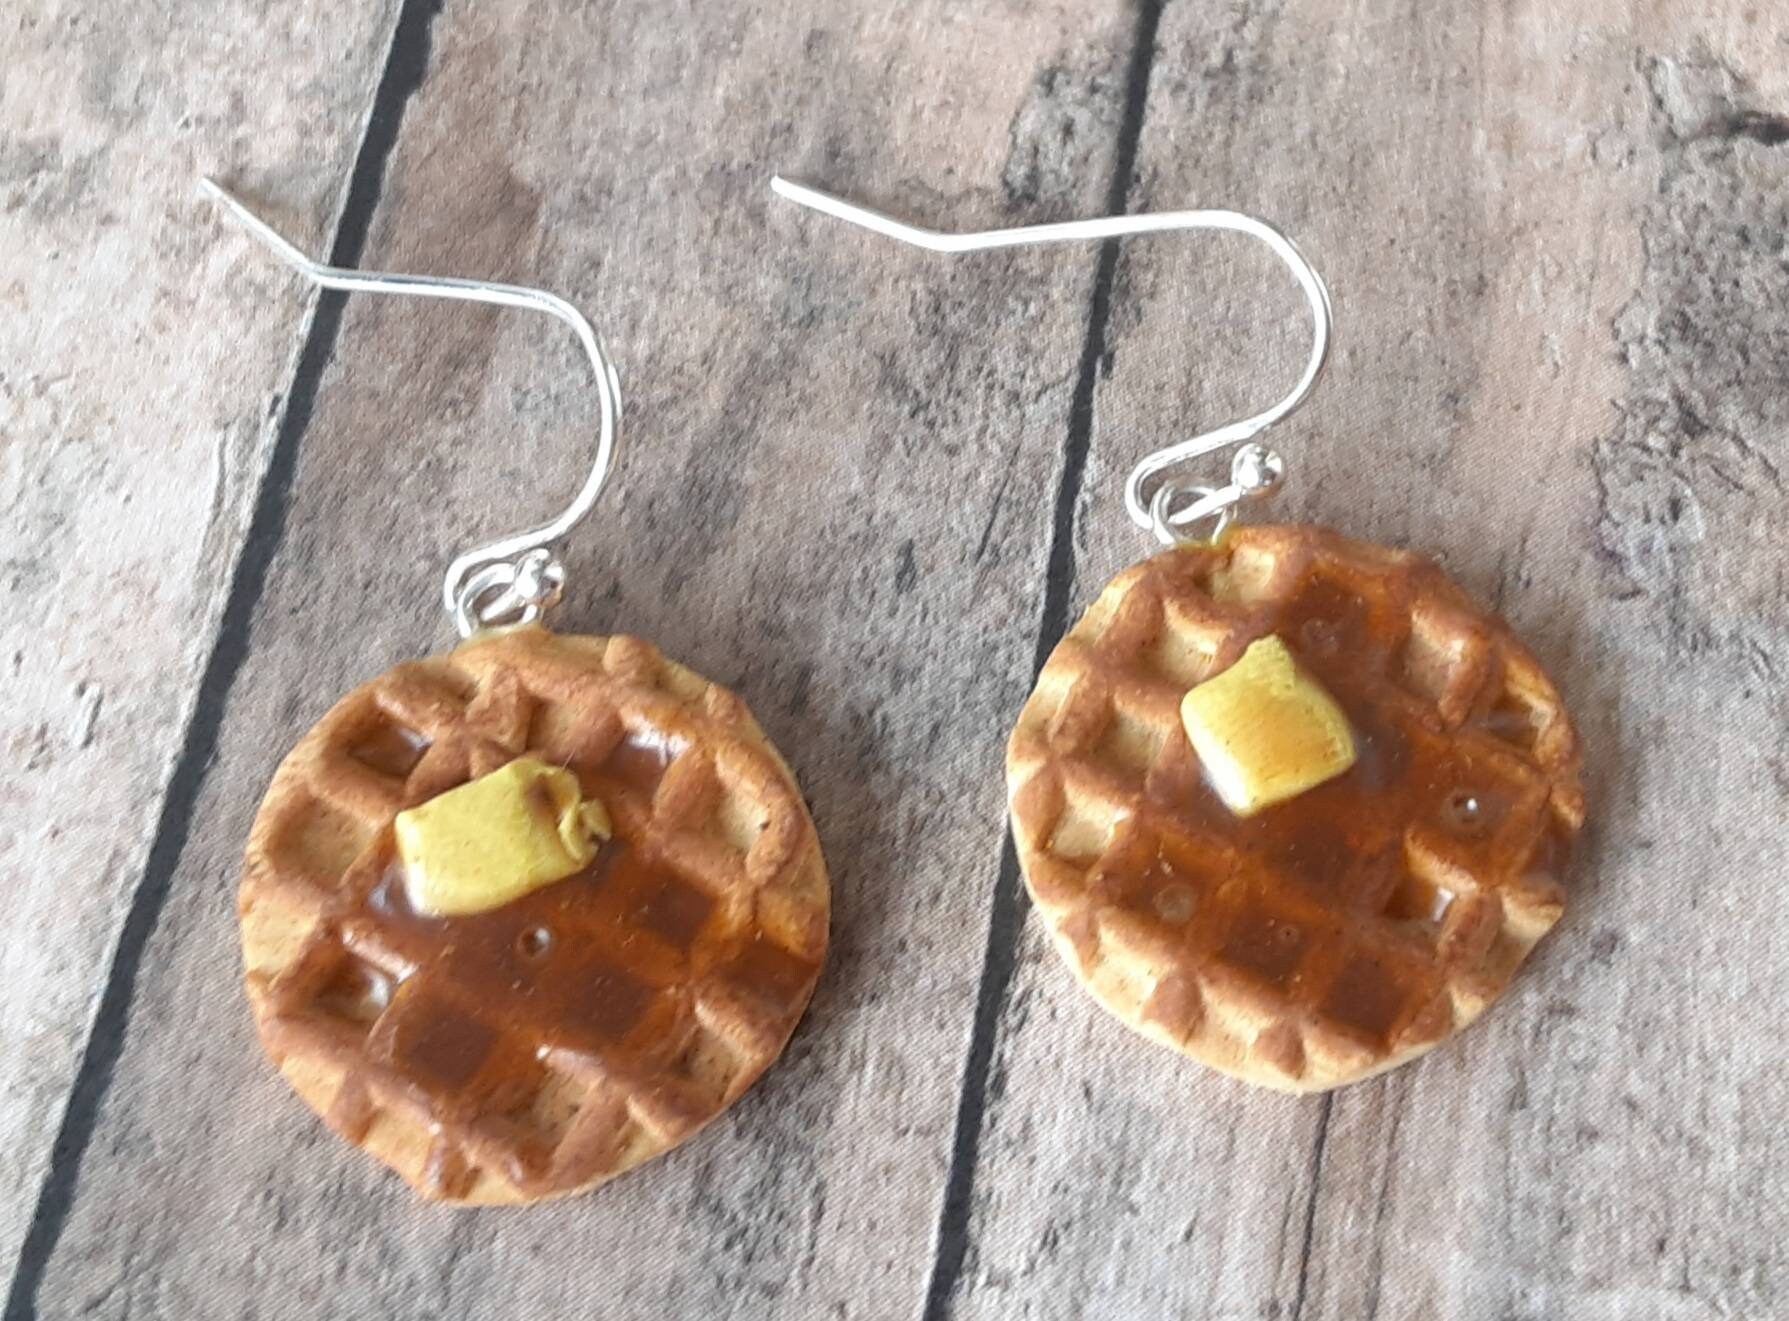 Ego Waffle Style Earrings for Women, Girls, Teens and More. Super Cute  Waffle House Style Earrings for Women. Eleven/ 11 Waffle Earrings from  Stranger